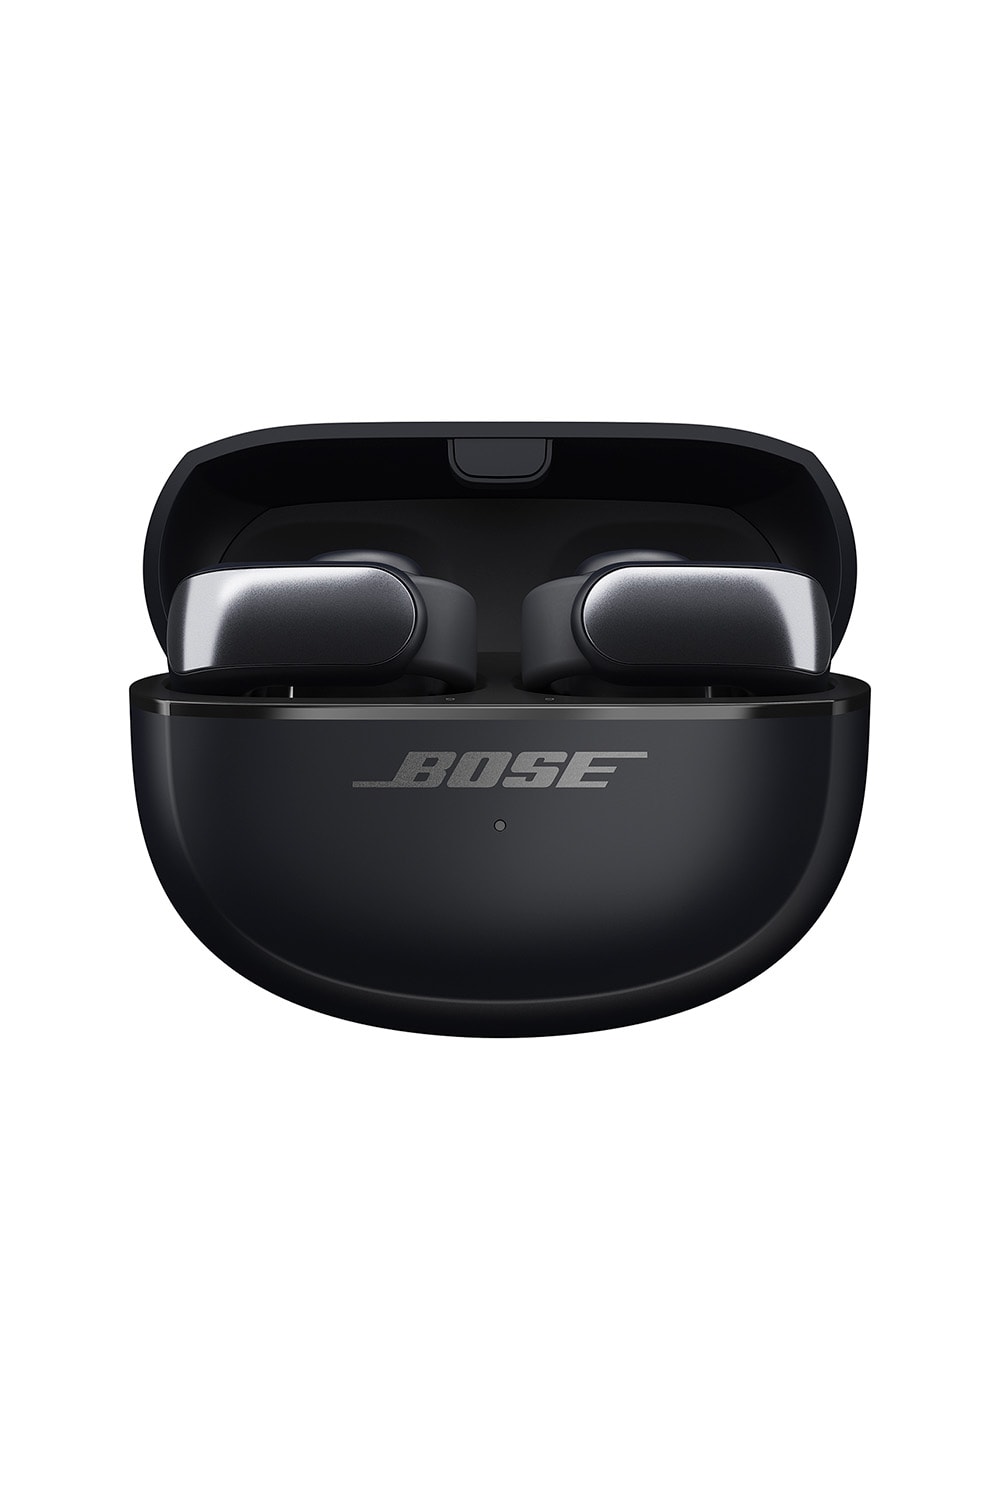 Bose's New Ultra Open Earbuds Are Unlike Anything Else We've Tried And They're Available Now